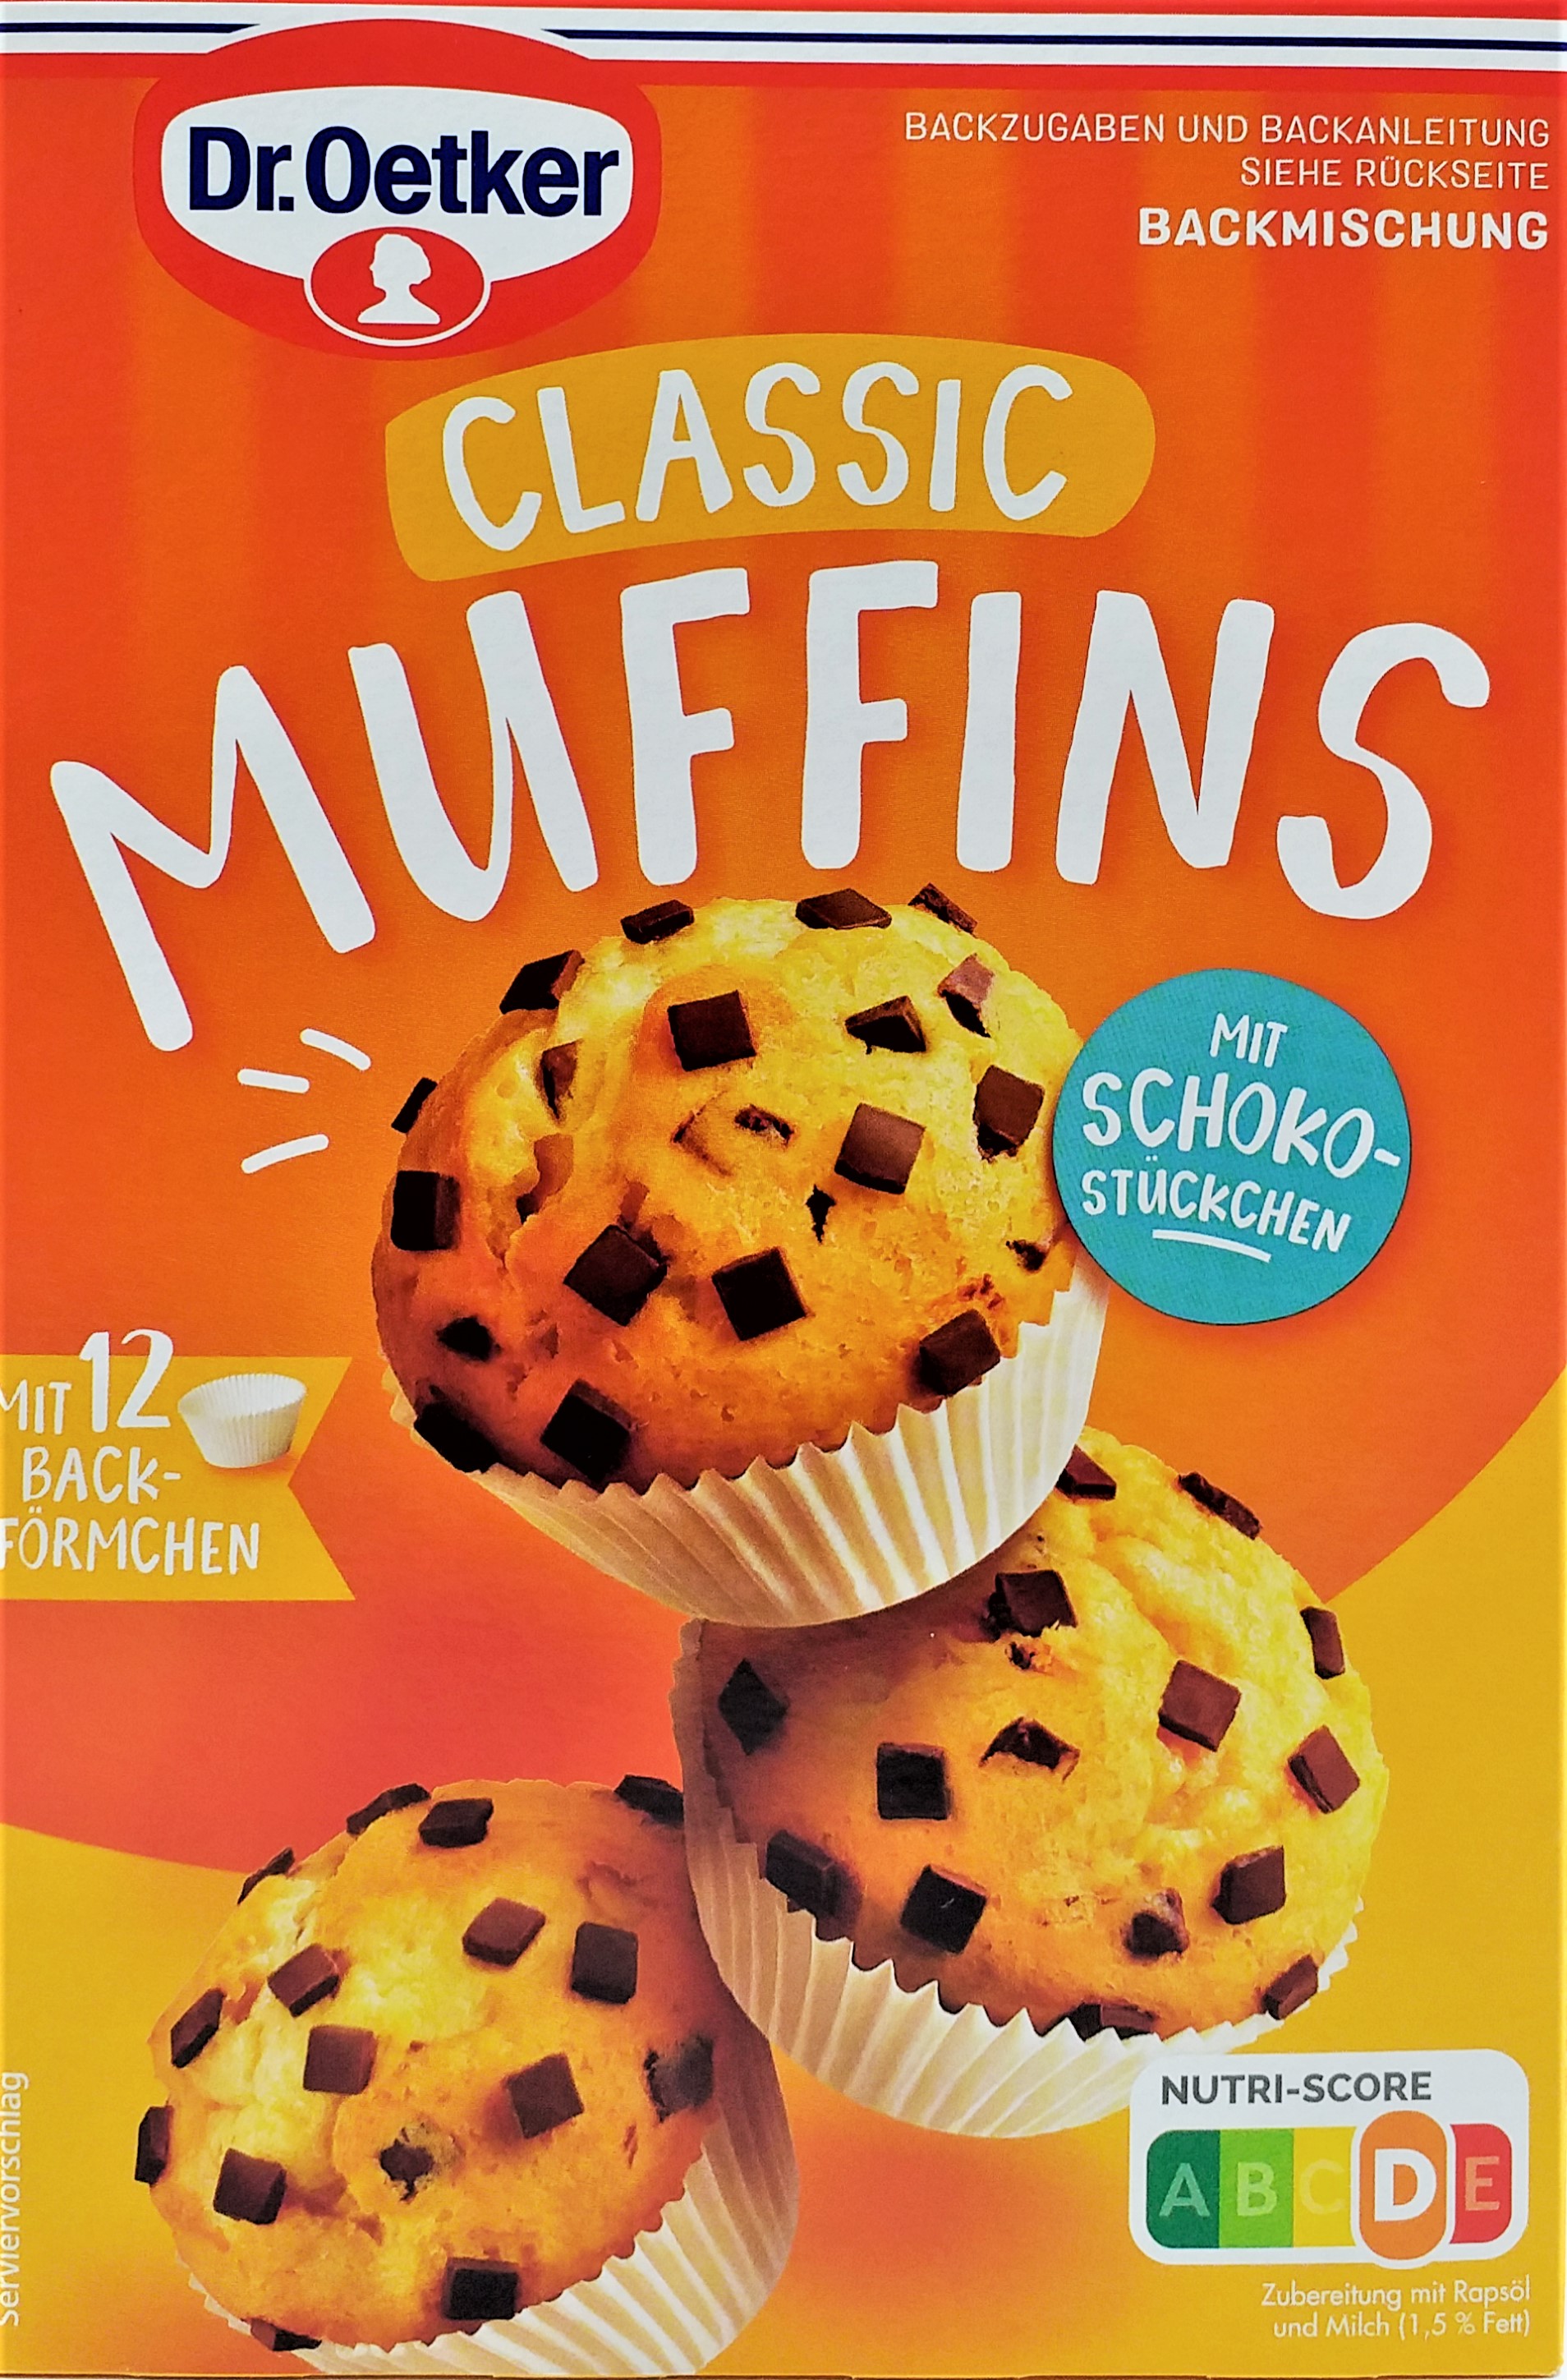 Dr. Oetker Classic Muffins 380g